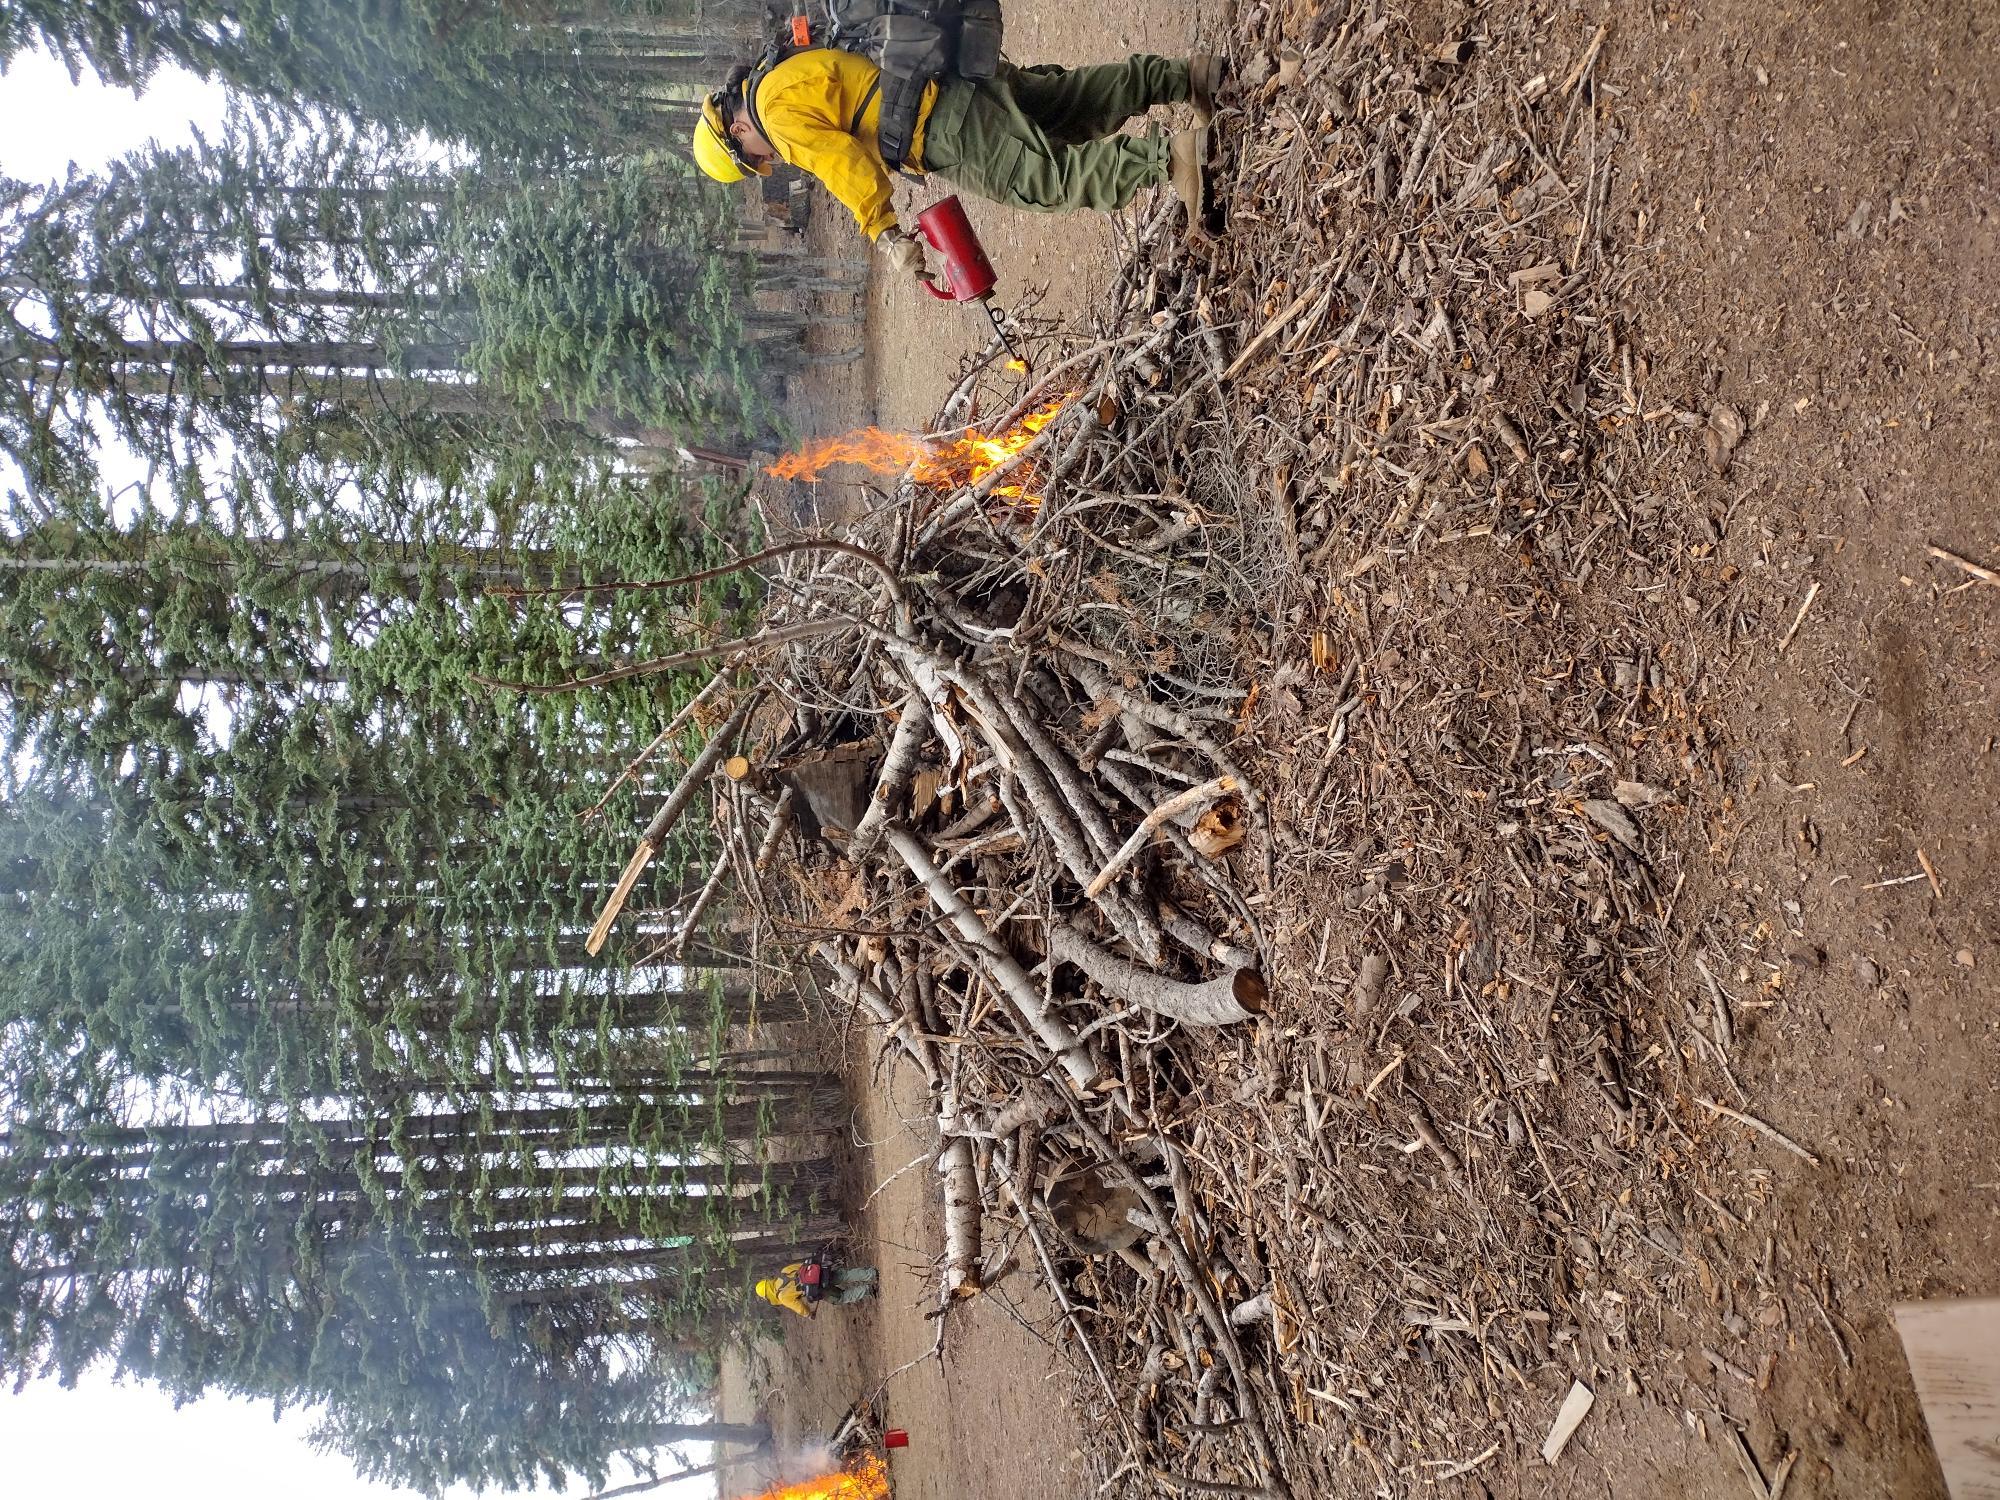 Firefighter using drip torch during ignitions on pile burn at Wells Cabin